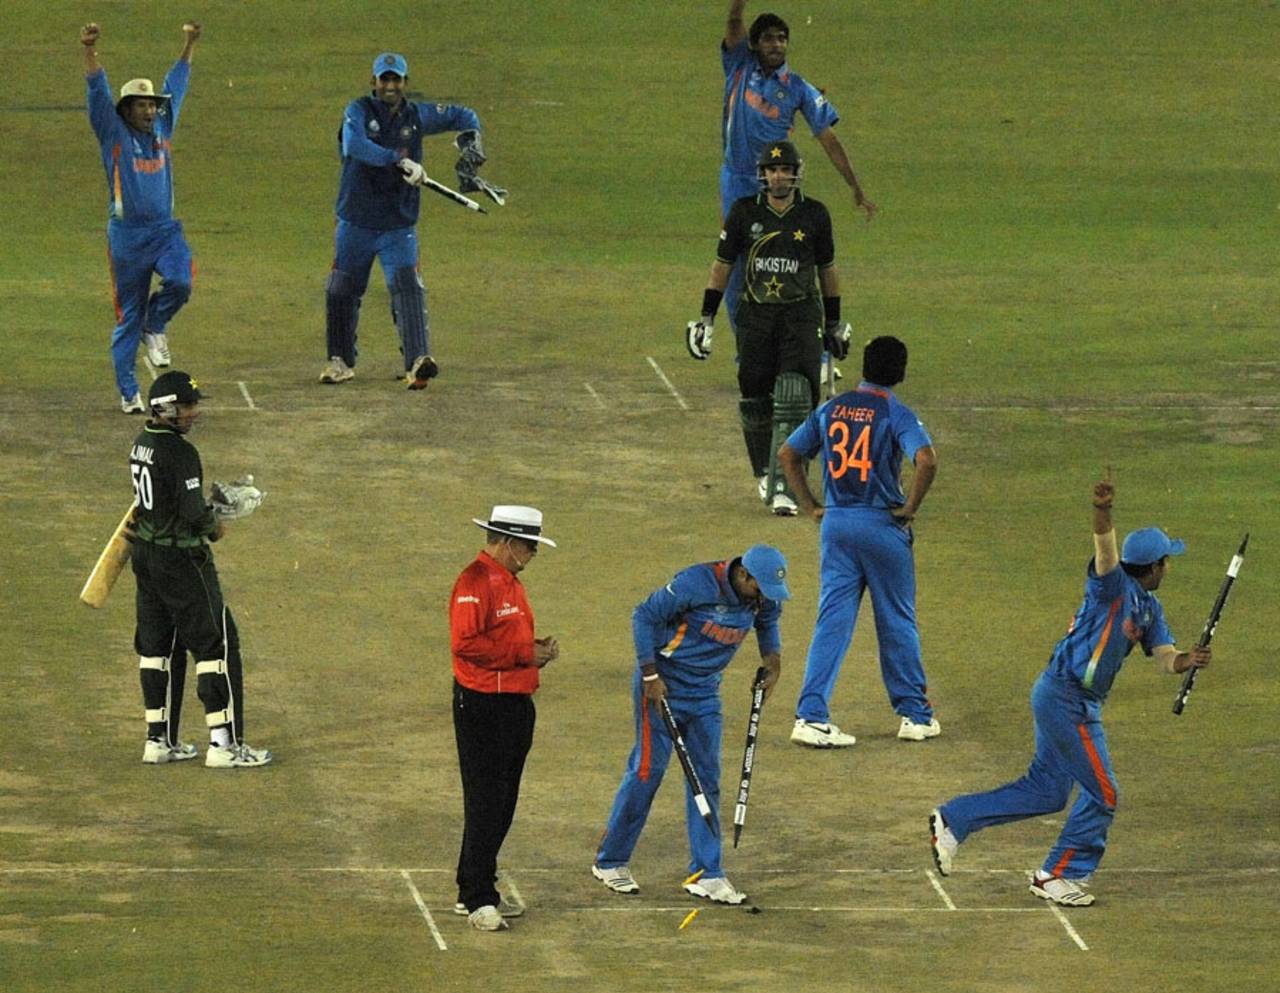 The celebrations begin after the victory is confirmed, India v Pakistan, 2nd semi-final, World Cup 2011, Mohali, March 30, 2011